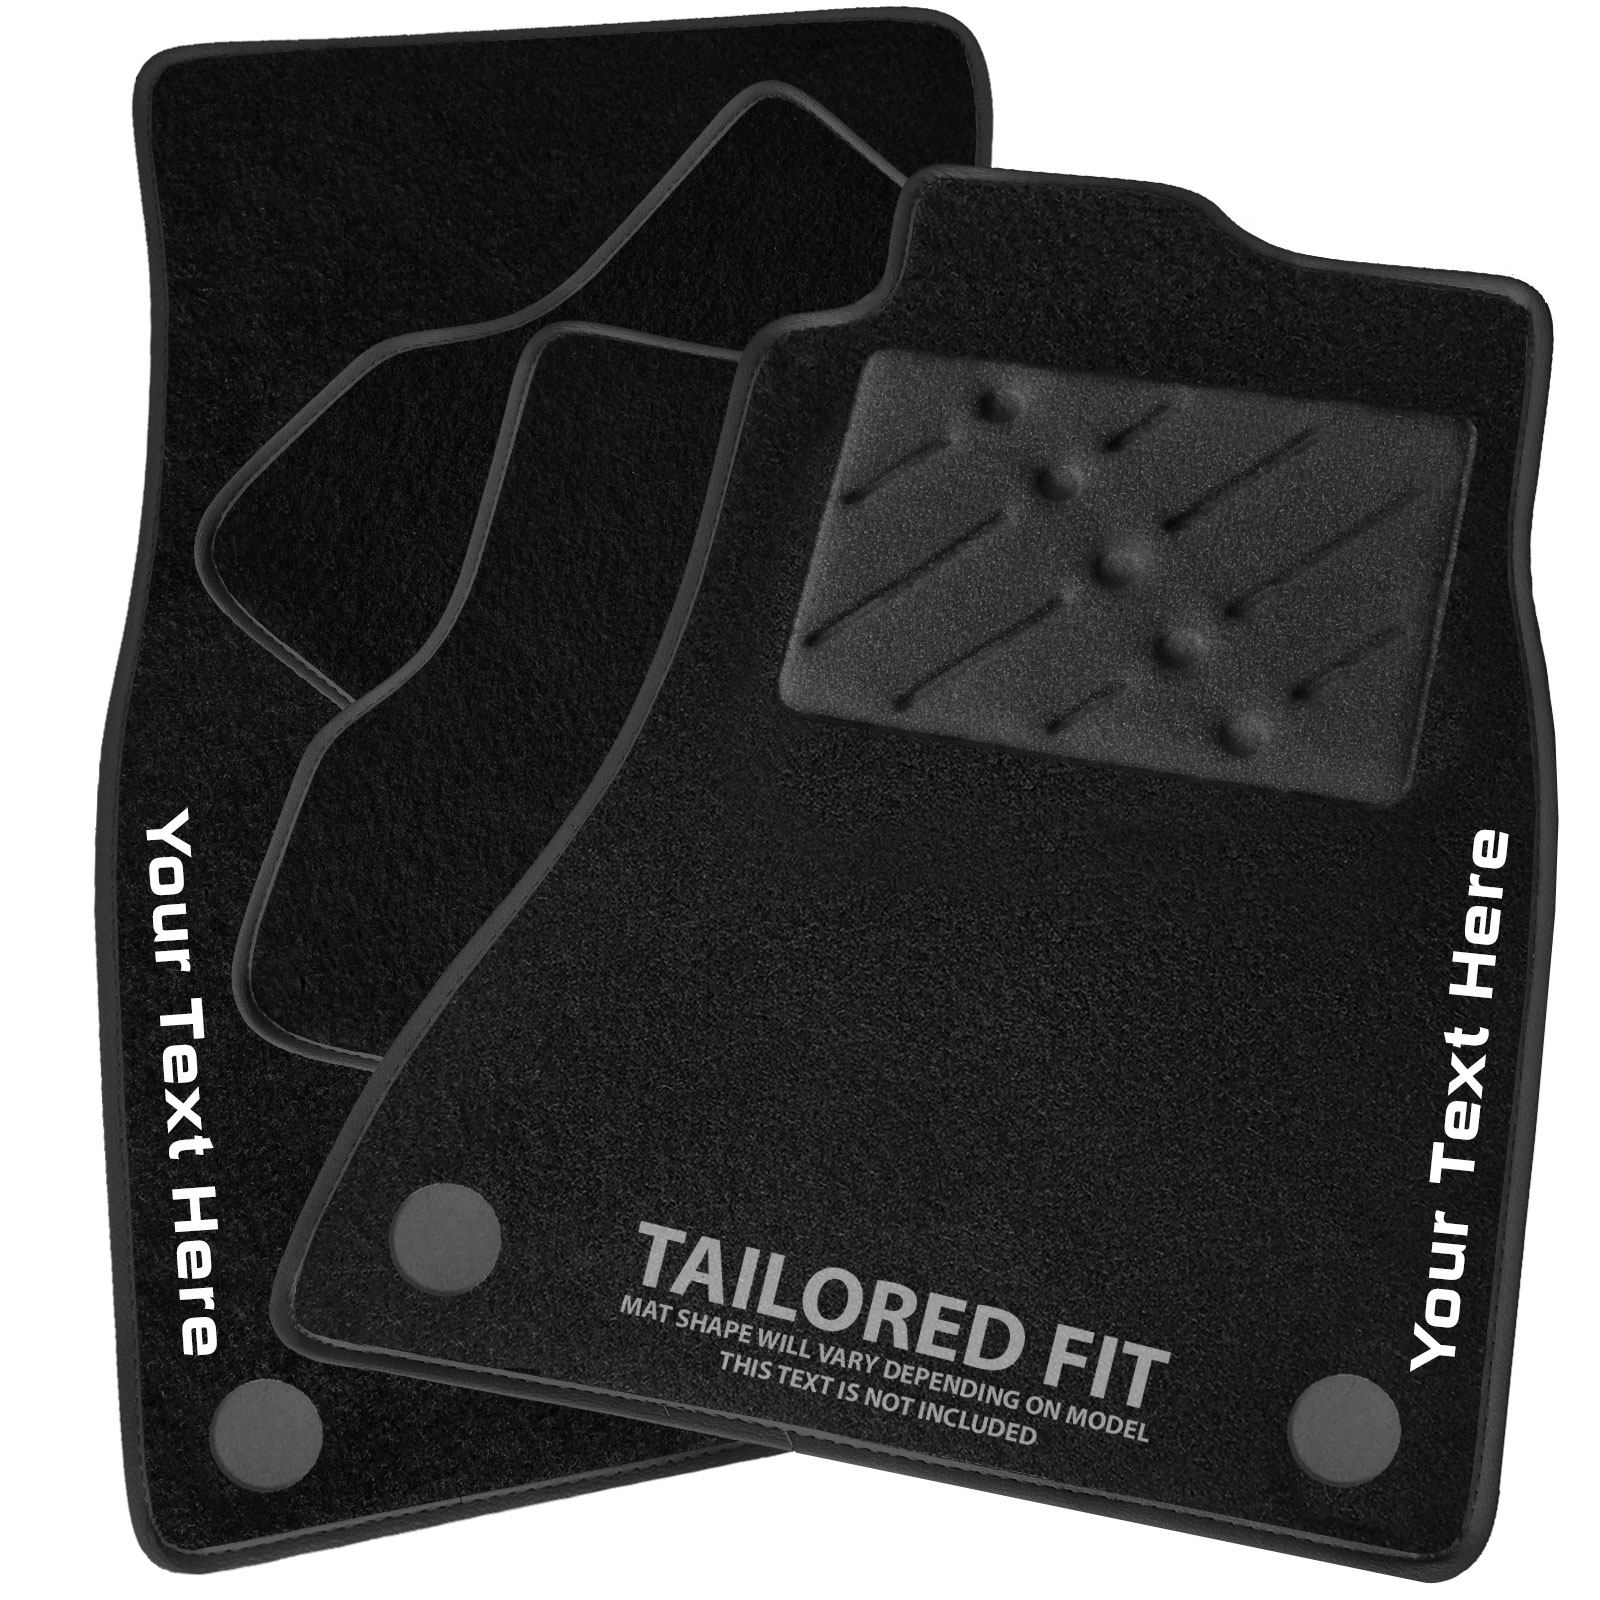 Lusso Floor Carpet Mats for Car Ford Kuga 2008 to 2012 Black Edging with UNIQUE LOGO 4-Piece Set.